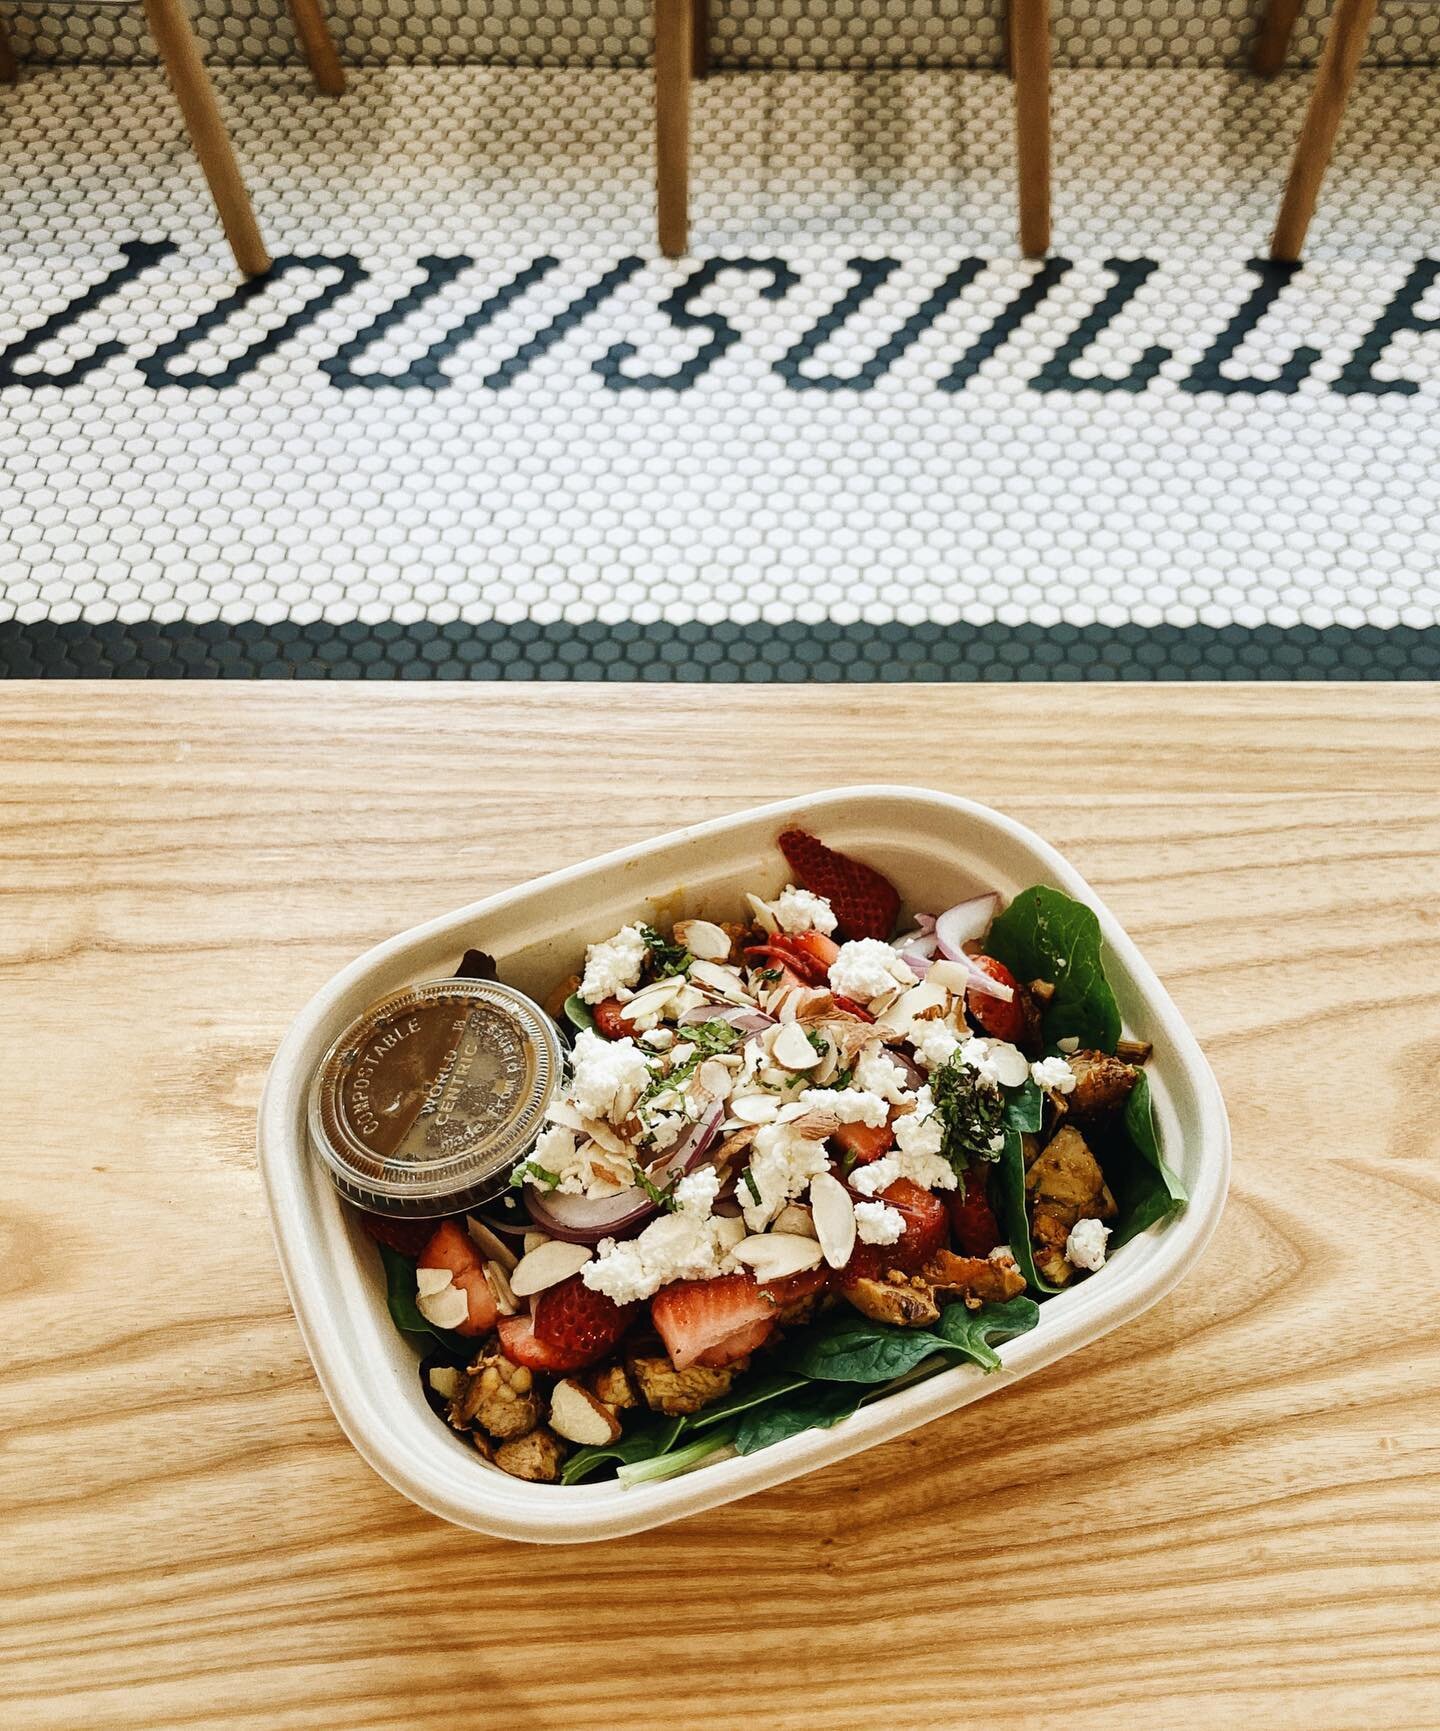 👋 Hey #louisville, we&rsquo;ve got you fully covered when it comes to farm fresh bowls and salads. Word on the street: they&rsquo;re kinda good✨